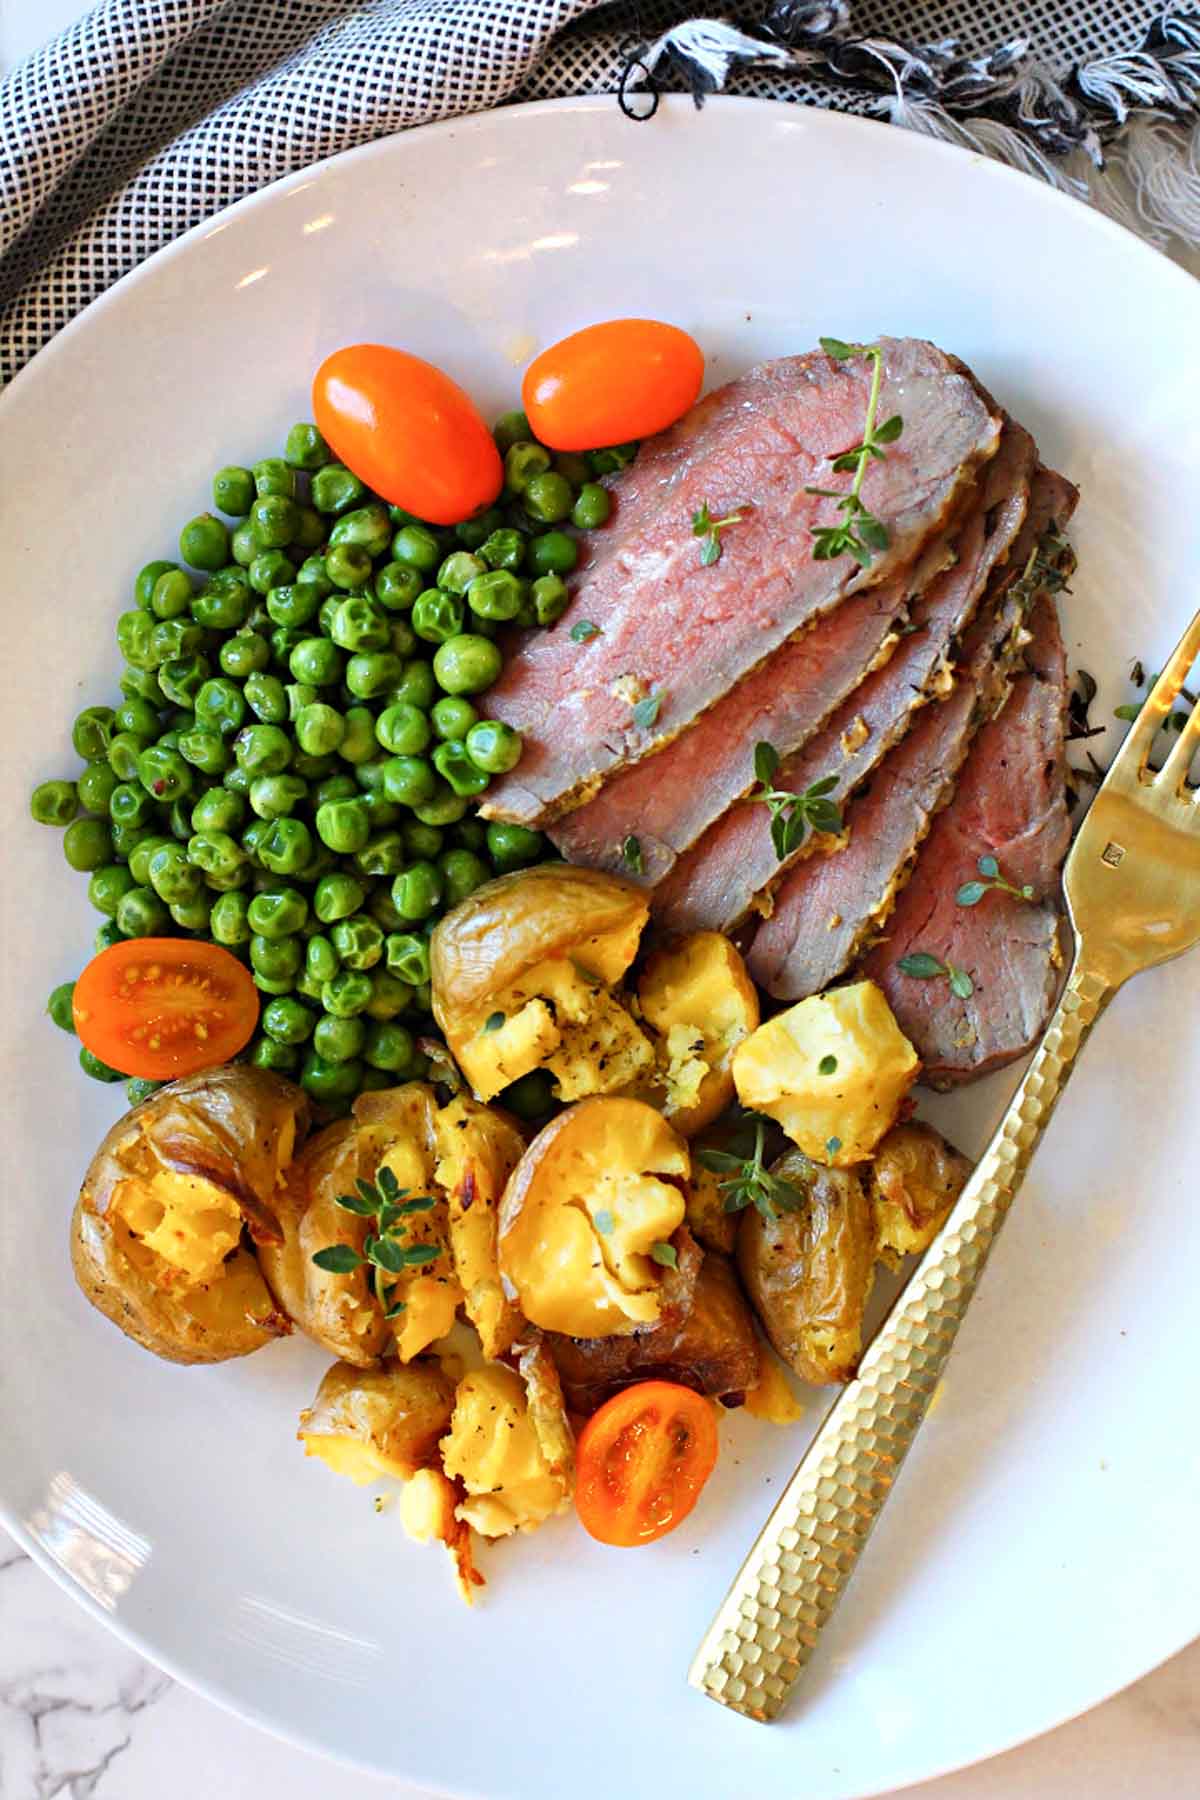 Baked tri-tip roast sliced and served with smashed potatoes and peas